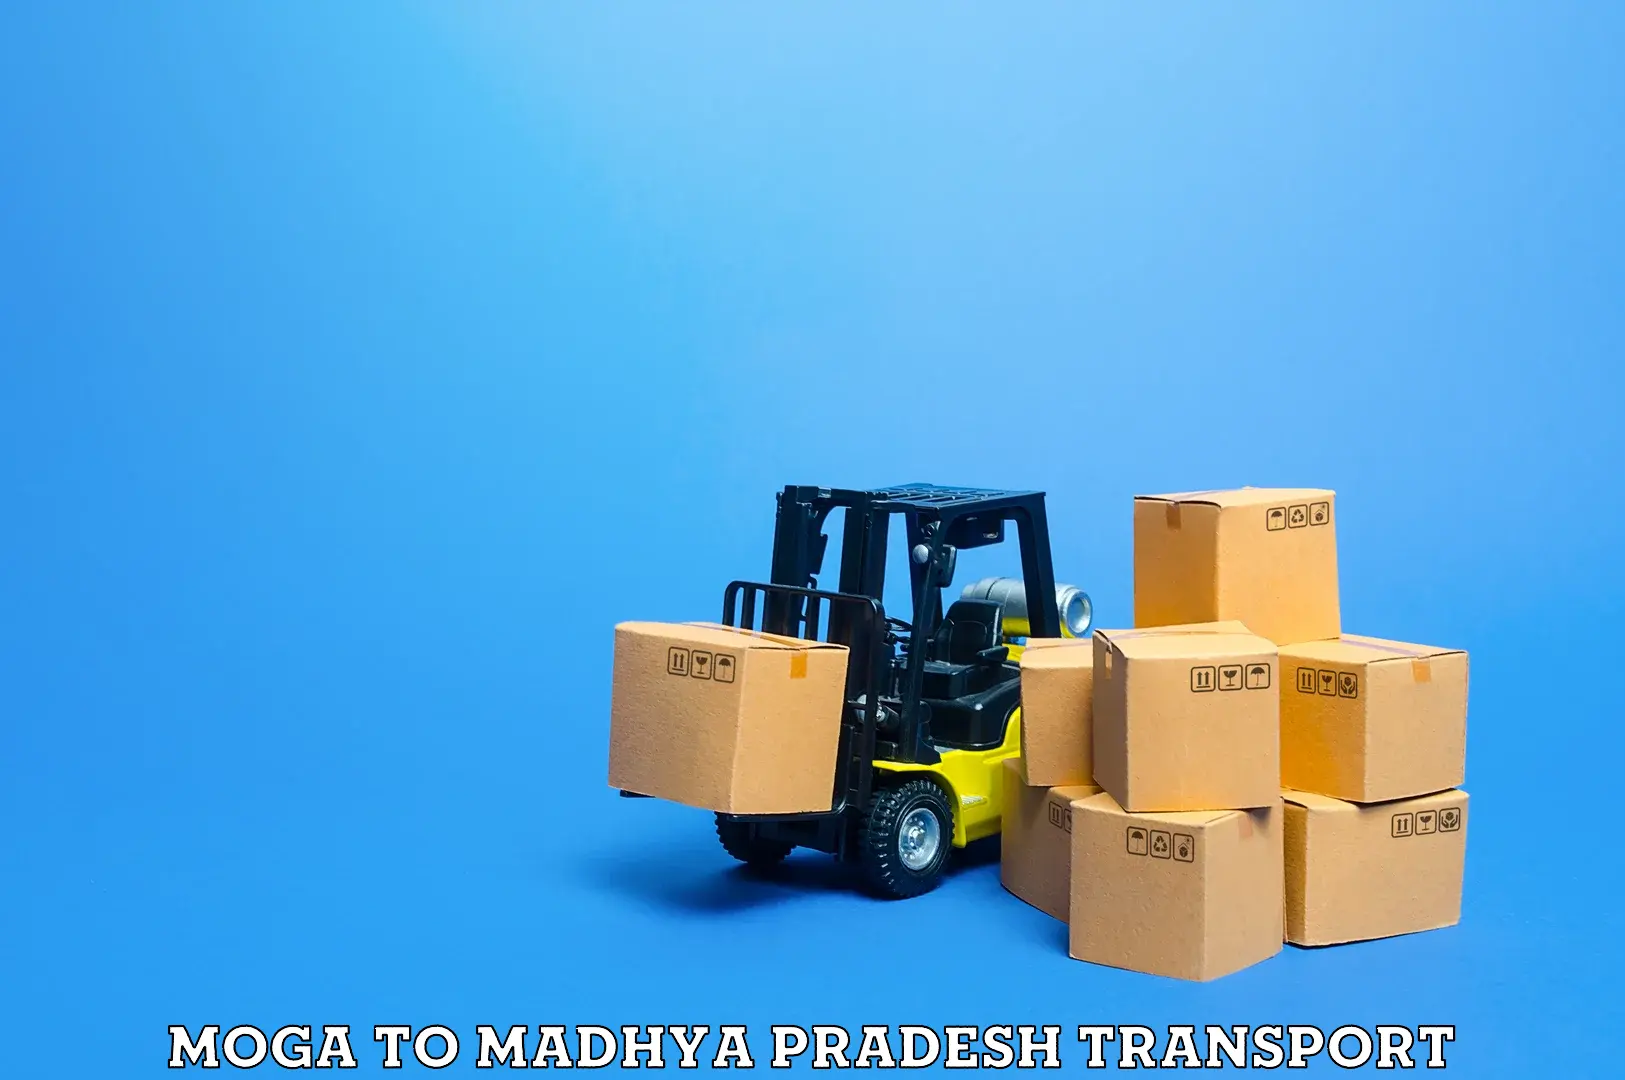 Truck transport companies in India Moga to Sidhi